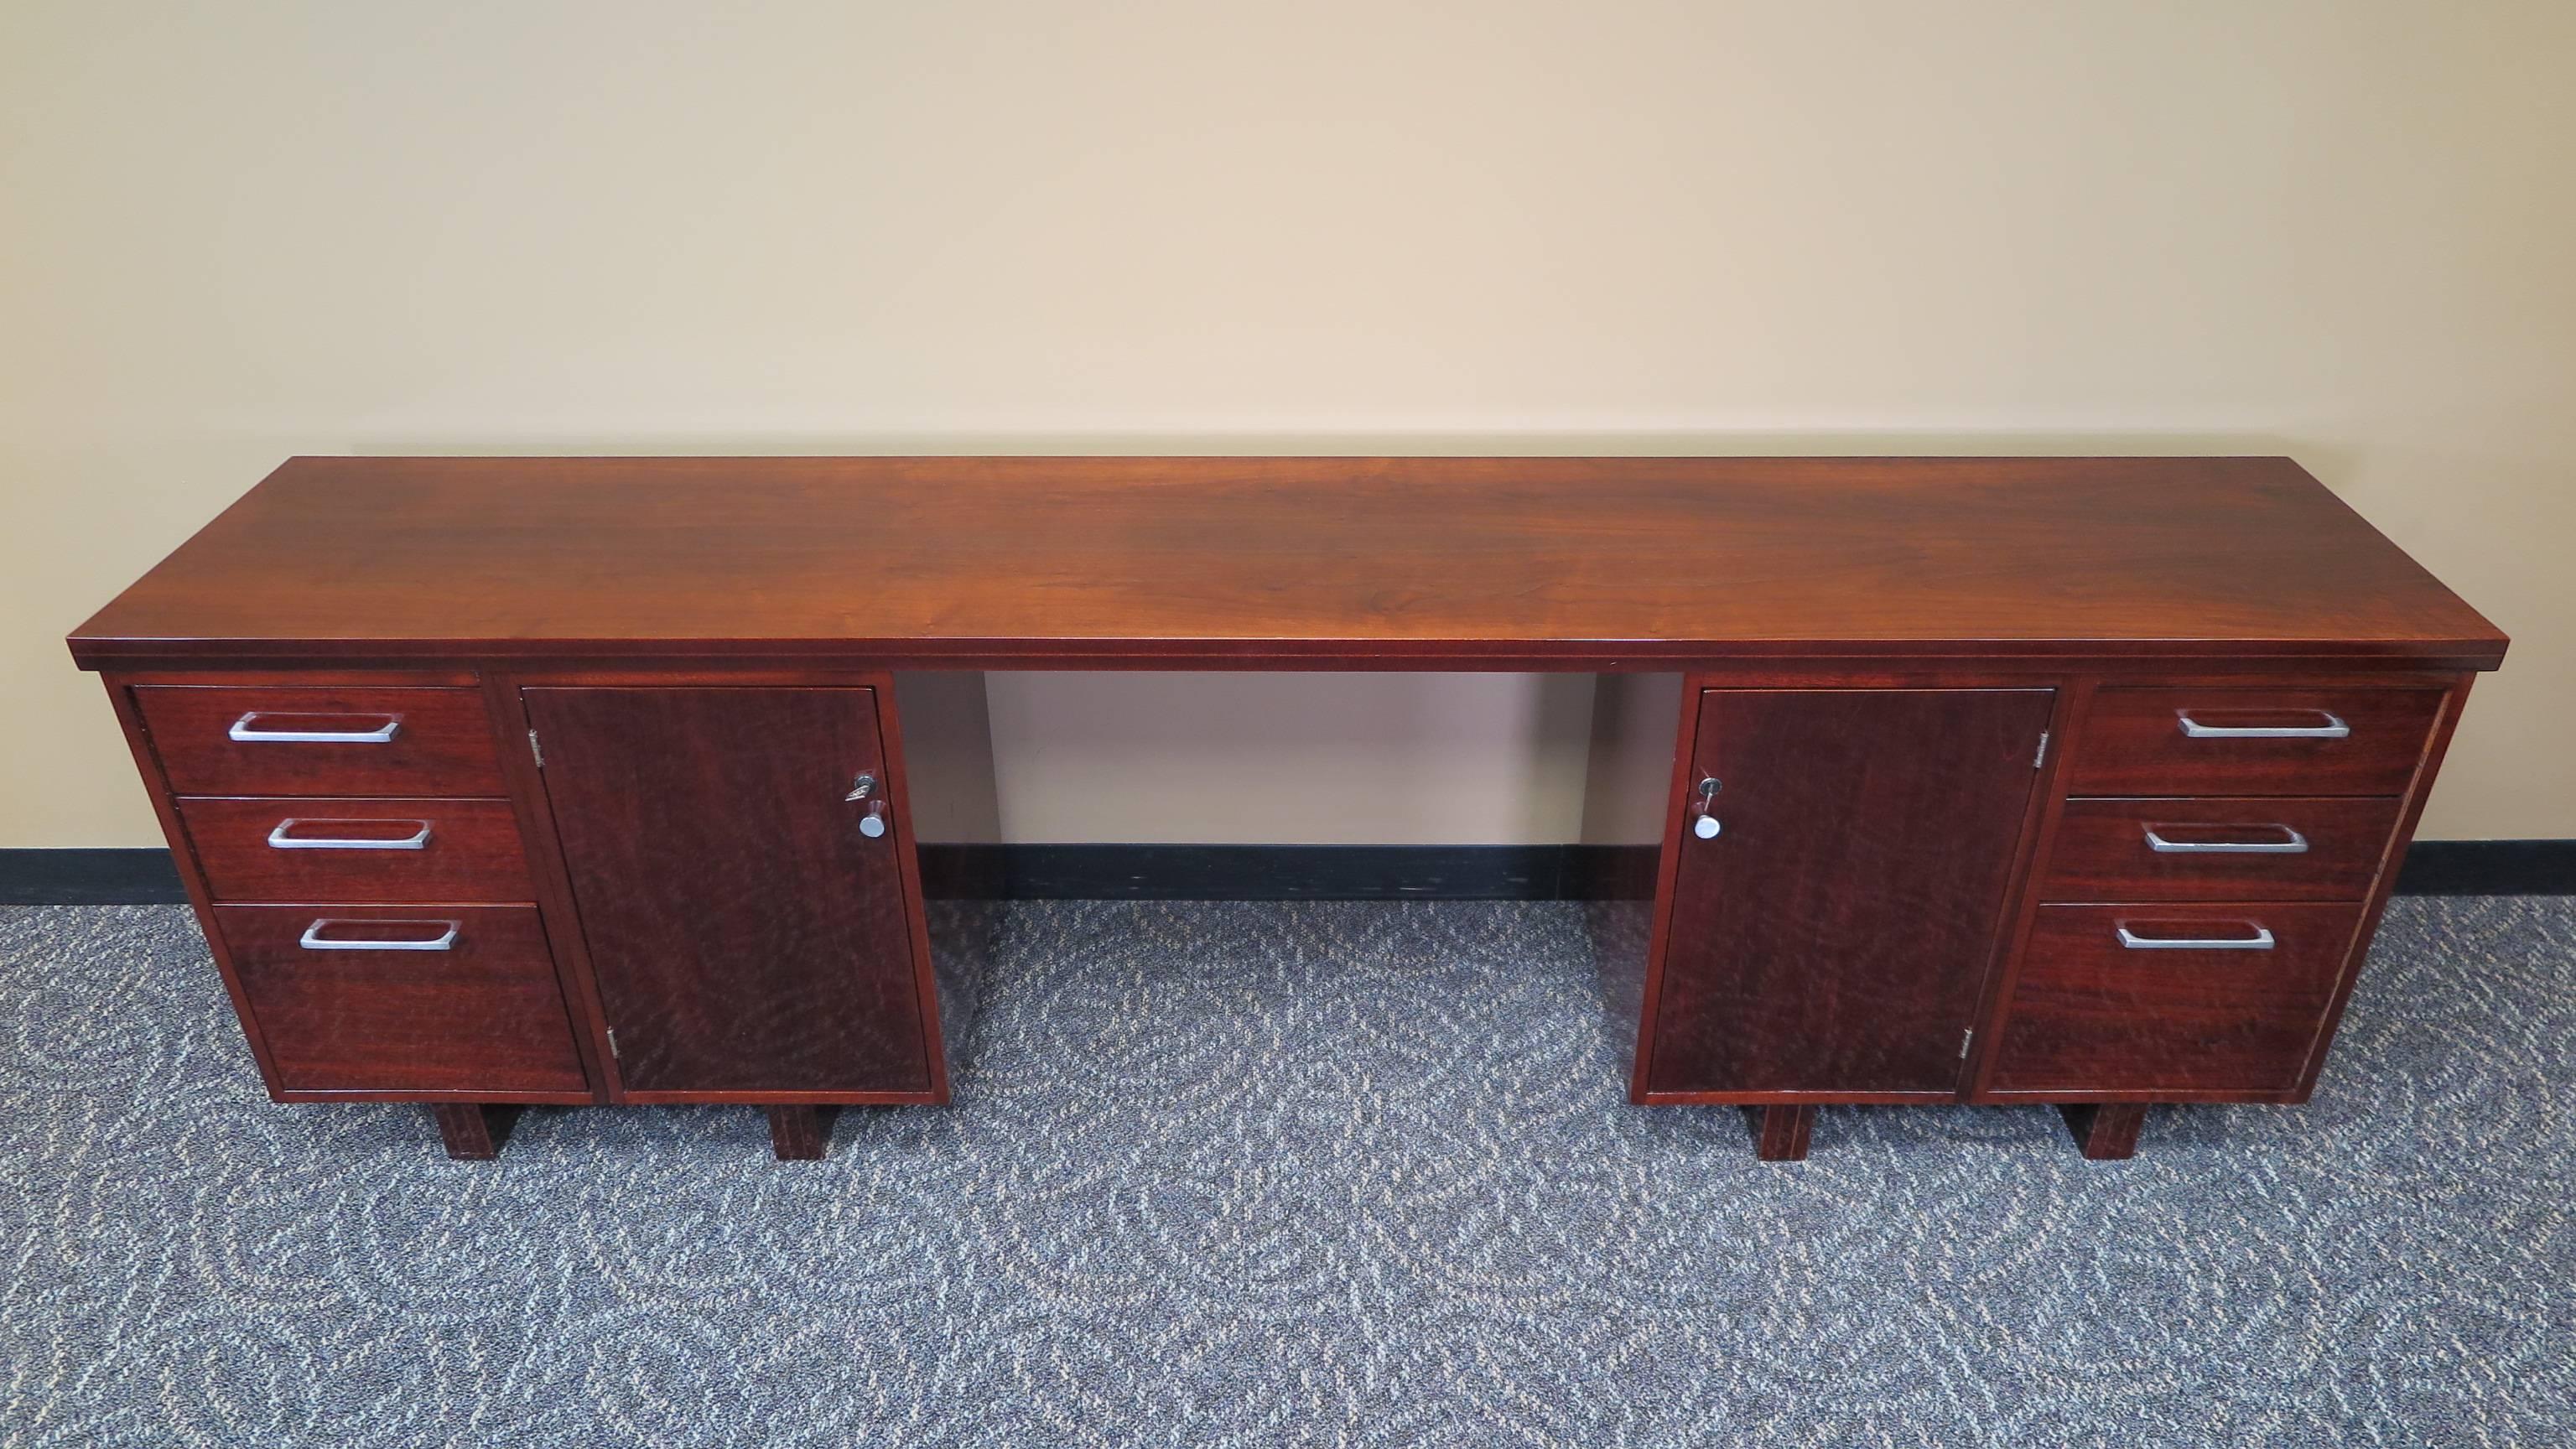 A midcentury console table desk, office console table. Mahogany work station console table with excellent storage. Four drawers, two file deep drawers and two locking cabinet storage compartments with shelf's. Includes two keys for both cabinet